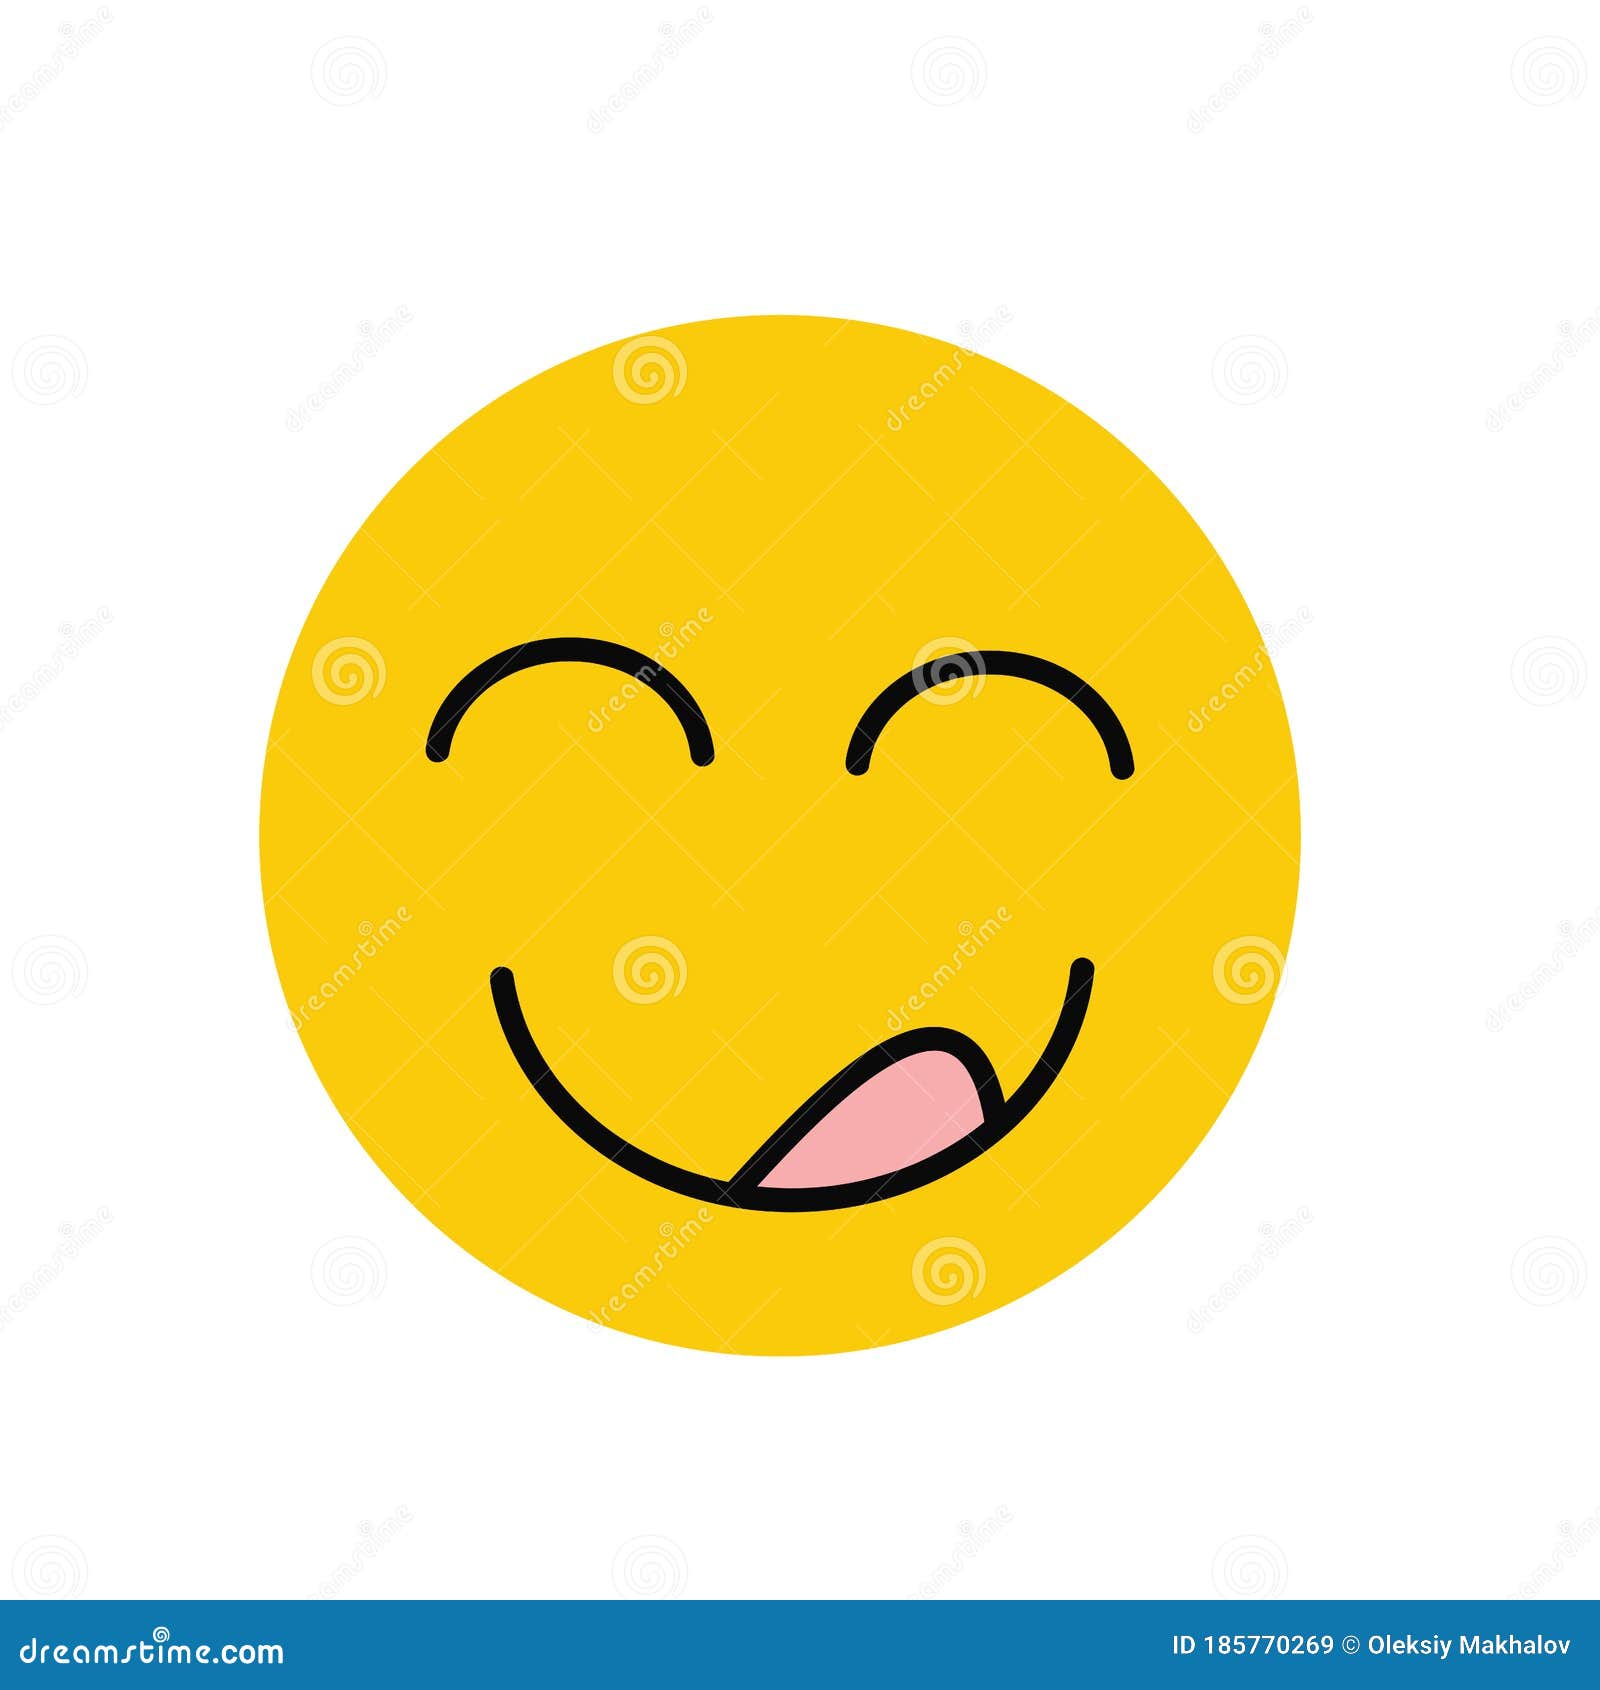 Yummy Icon Hungry Smiling Face With Mouth And Tongue Emoji Delicious Healthy Funny Lunch Tasty Mood Smile Avatar Happy Yellow Stock Vector Illustration Of Chat Eating